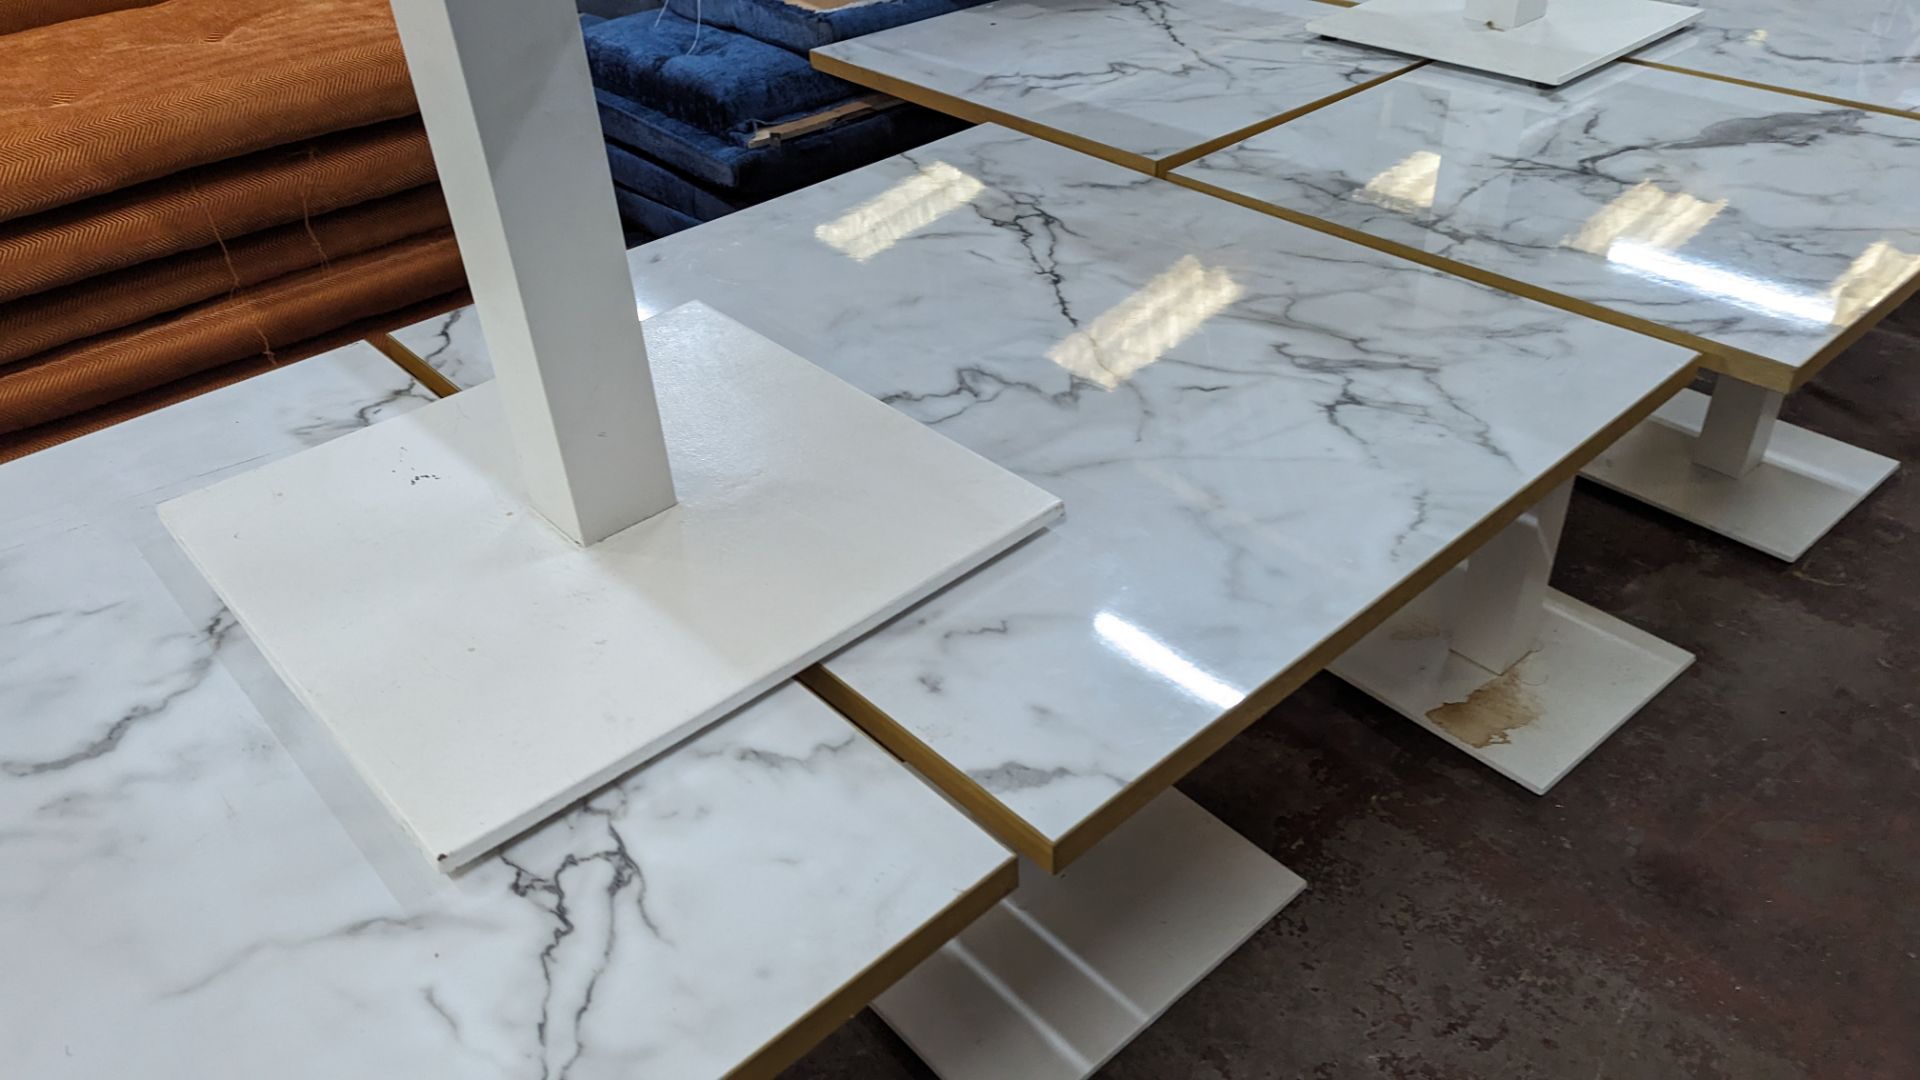 10 off matching dining tables in 3 different sizes with marble effect tops. 2 of the tables are ret - Image 7 of 19